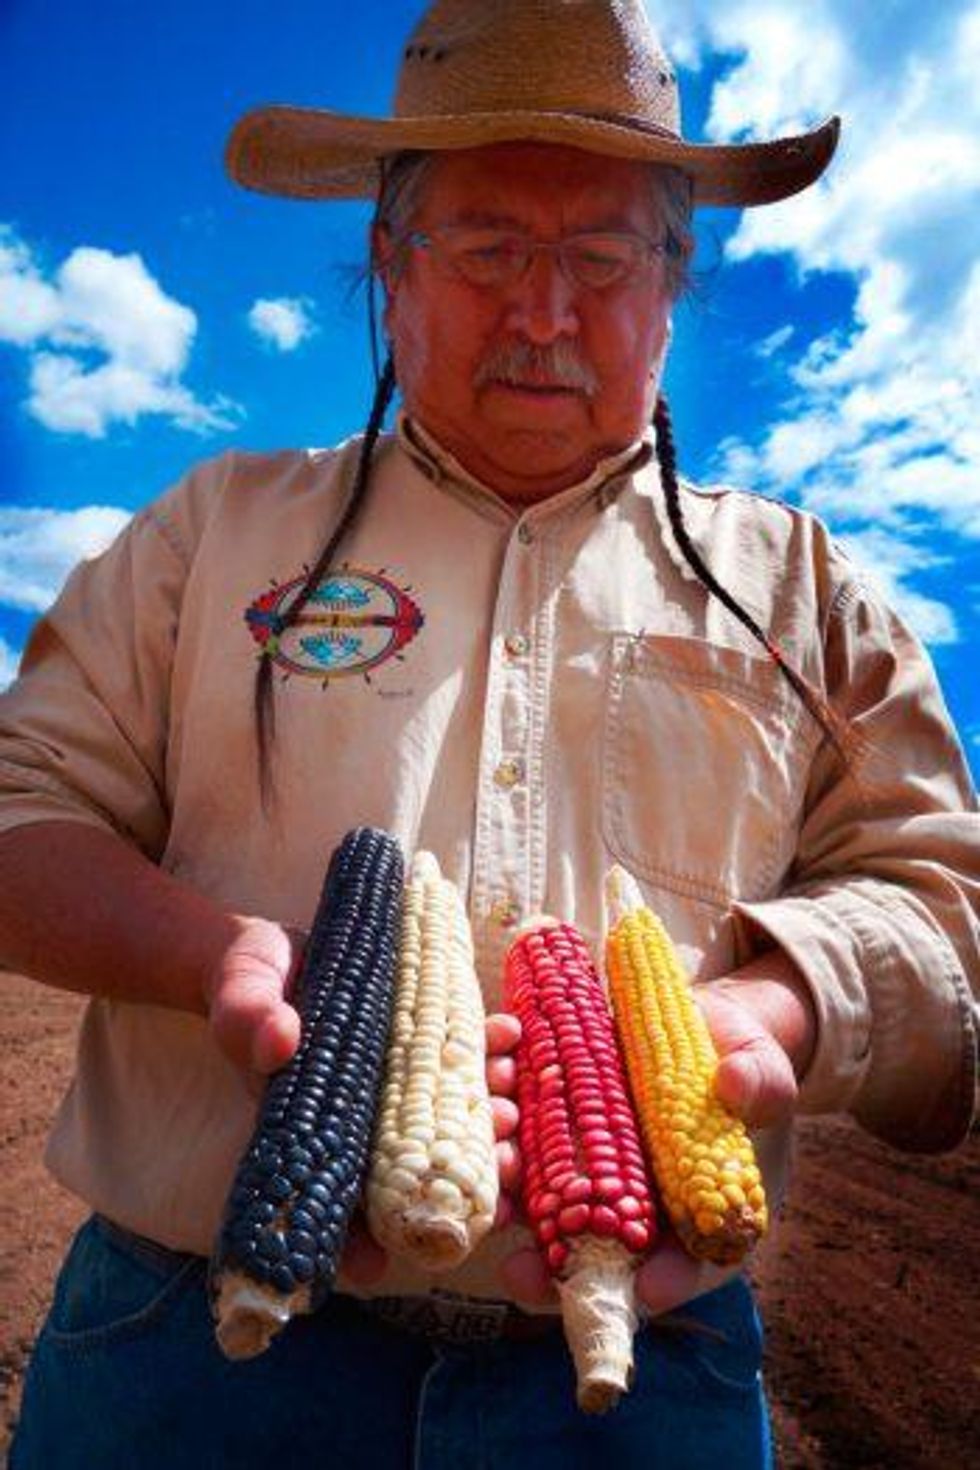 Clayton Brascoupe holds several ears of indigenous corn. (Photo courtesy of SEED: The Untold Story / Collective Eye Films)